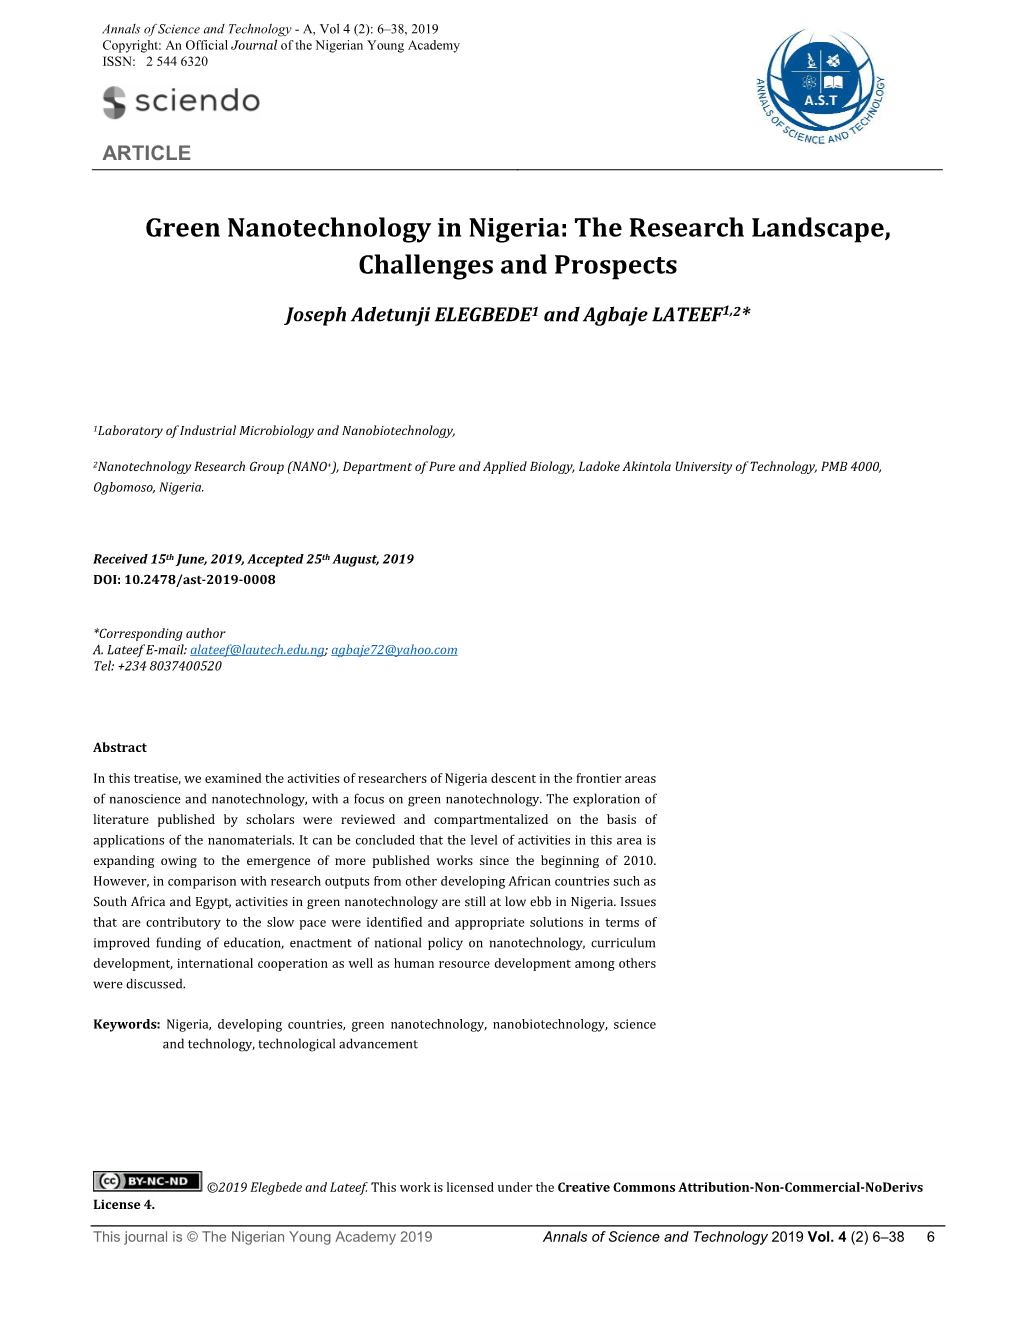 Green Nanotechnology in Nigeria: the Research Landscape, Challenges and Prospects